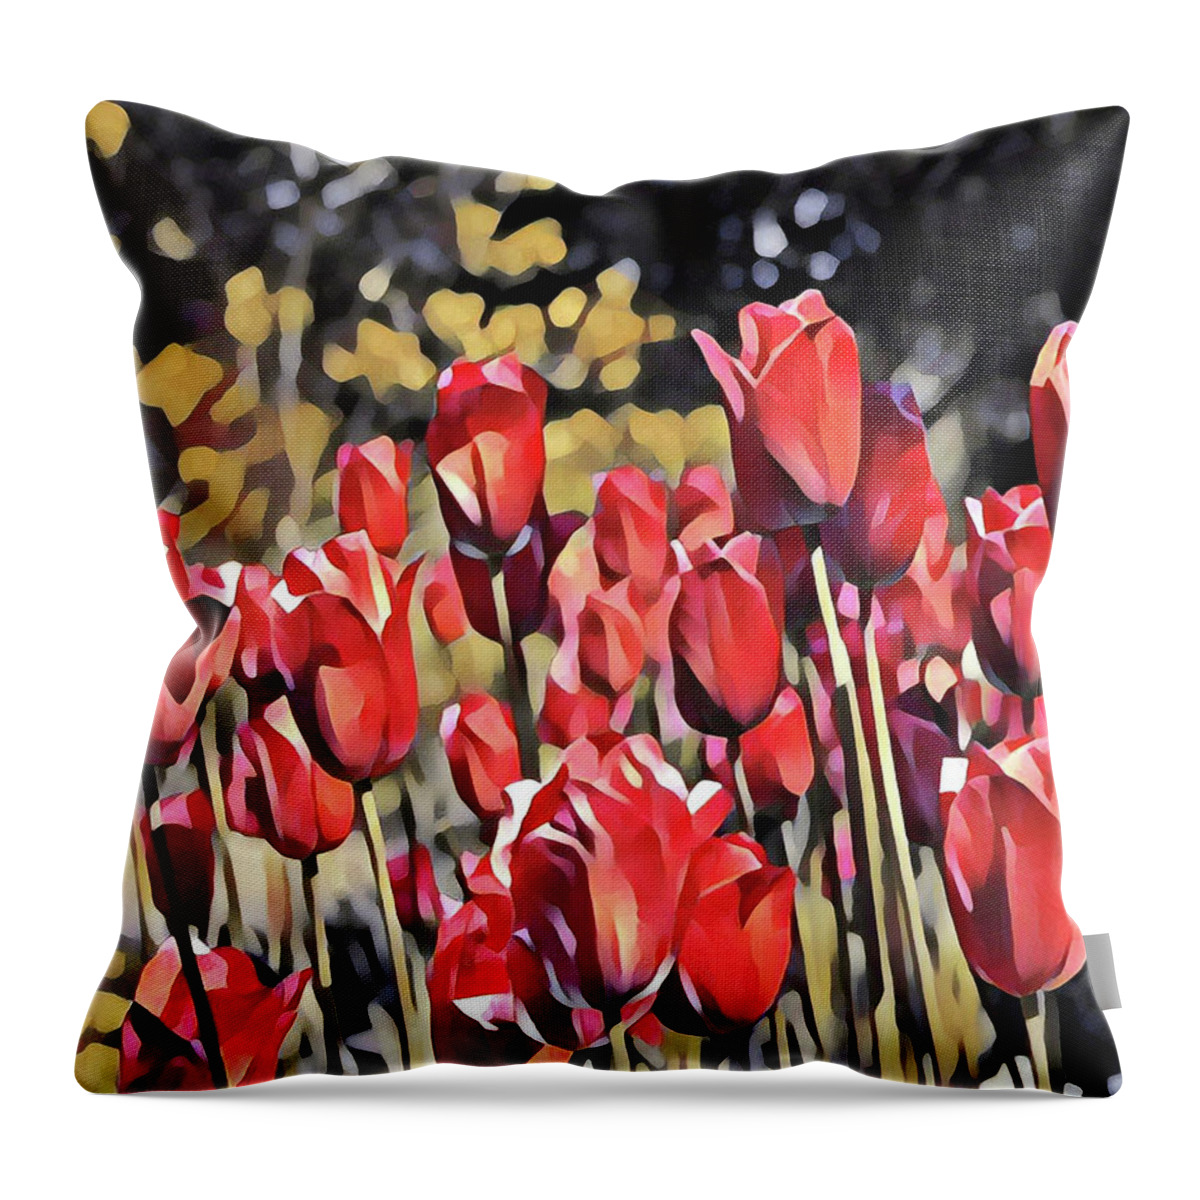 Floral Painting Throw Pillow featuring the digital art Luscious Red Tulips by Mary Gaines